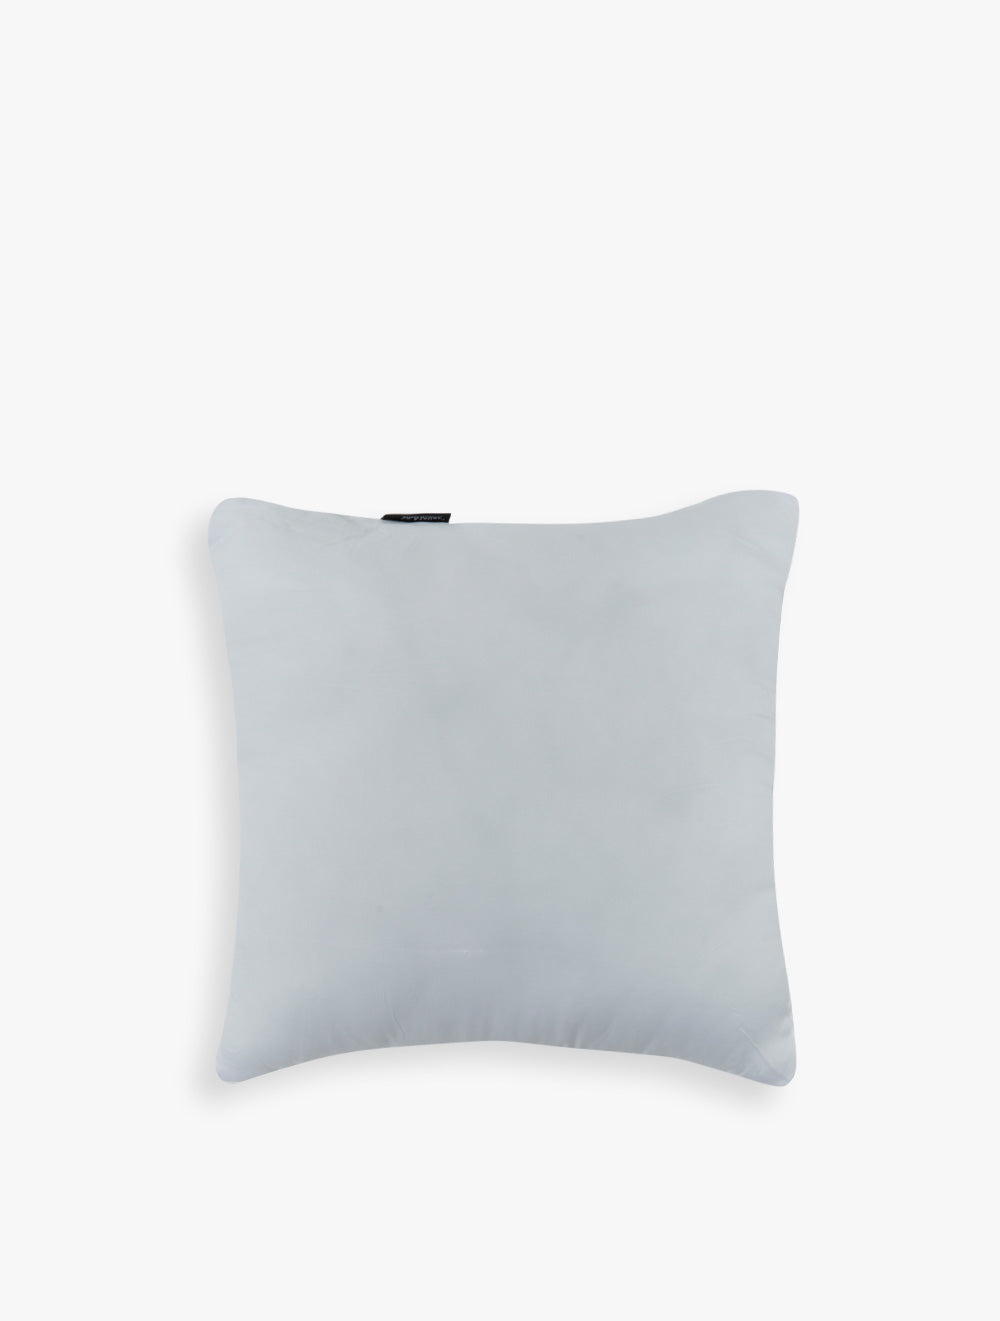 GENI HOME FURNISHING Le Atelier - New Pillow Insert